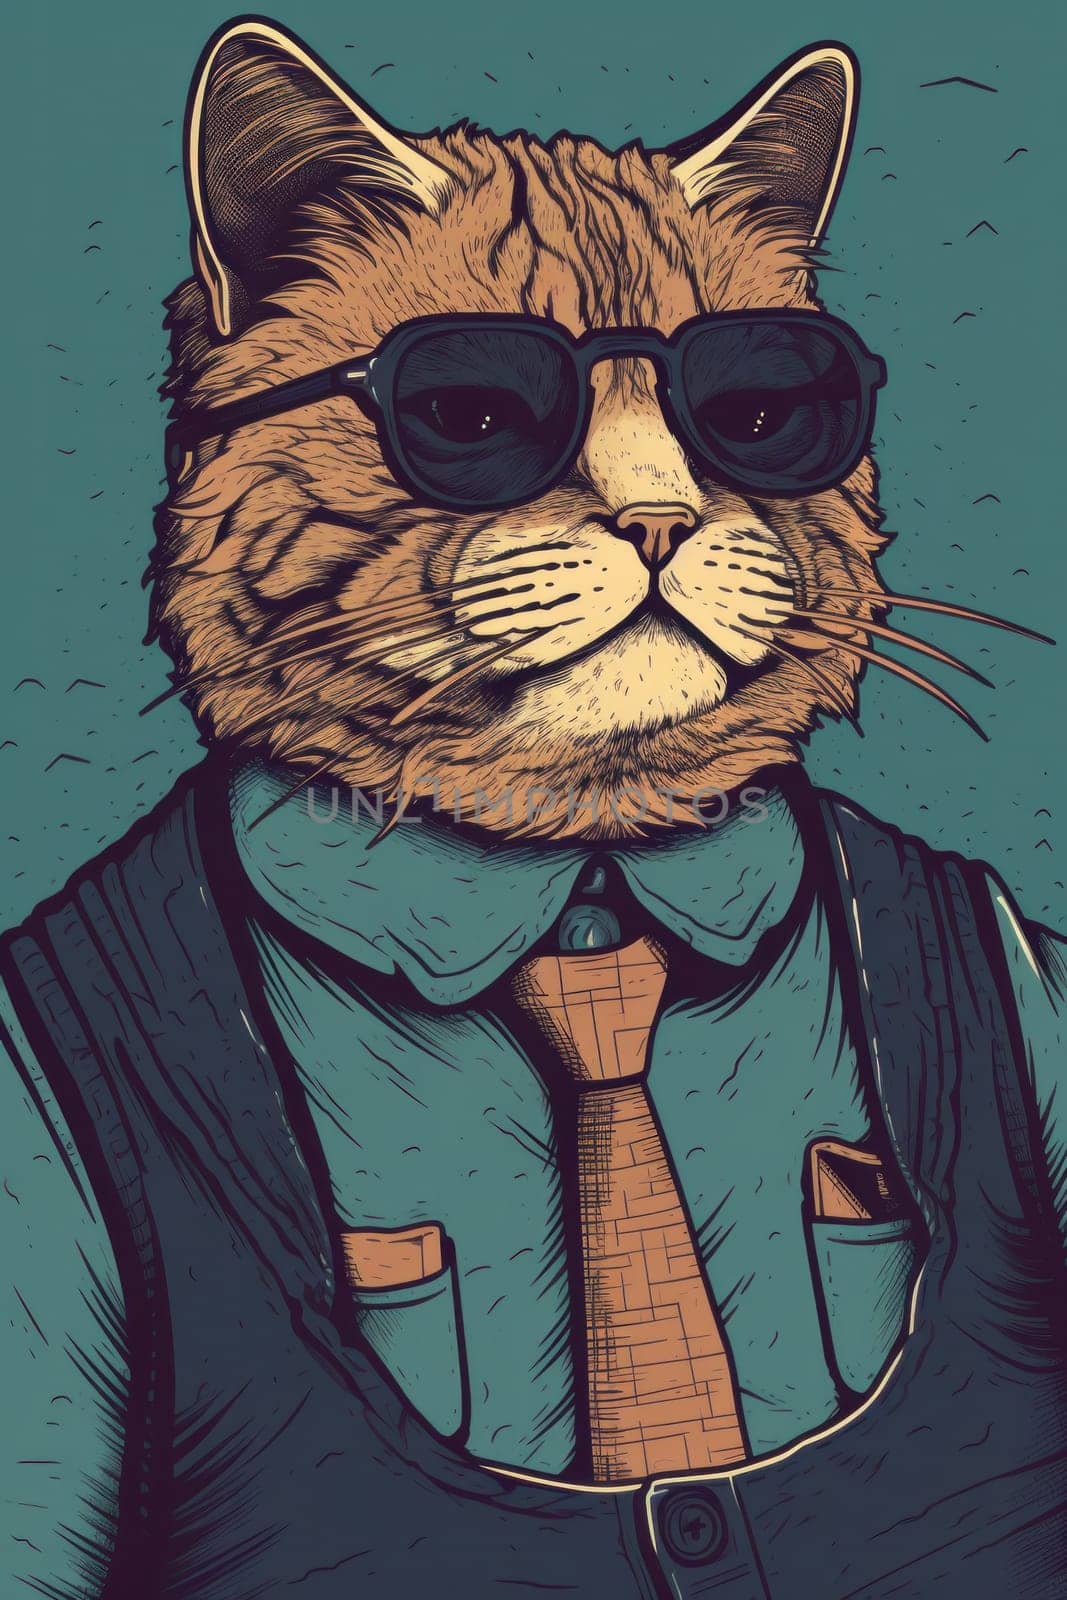 A drawing of a cat wearing sunglasses and a tie